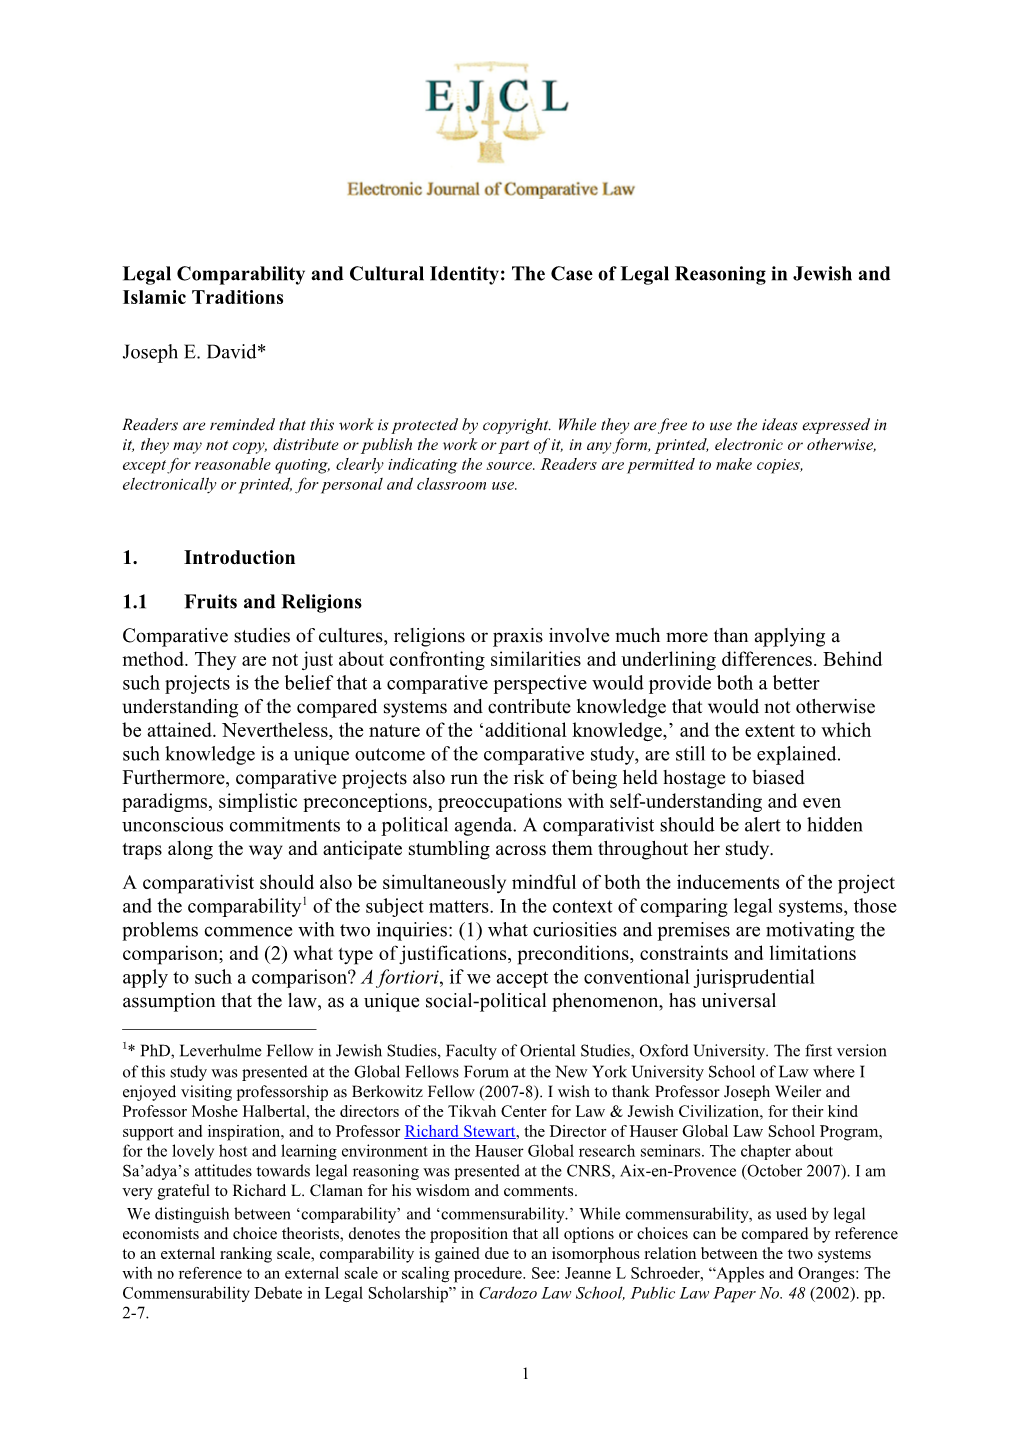 Legal Comparability and Cultural Identity:The Case of Legal Reasoning in Jewish and Islamic